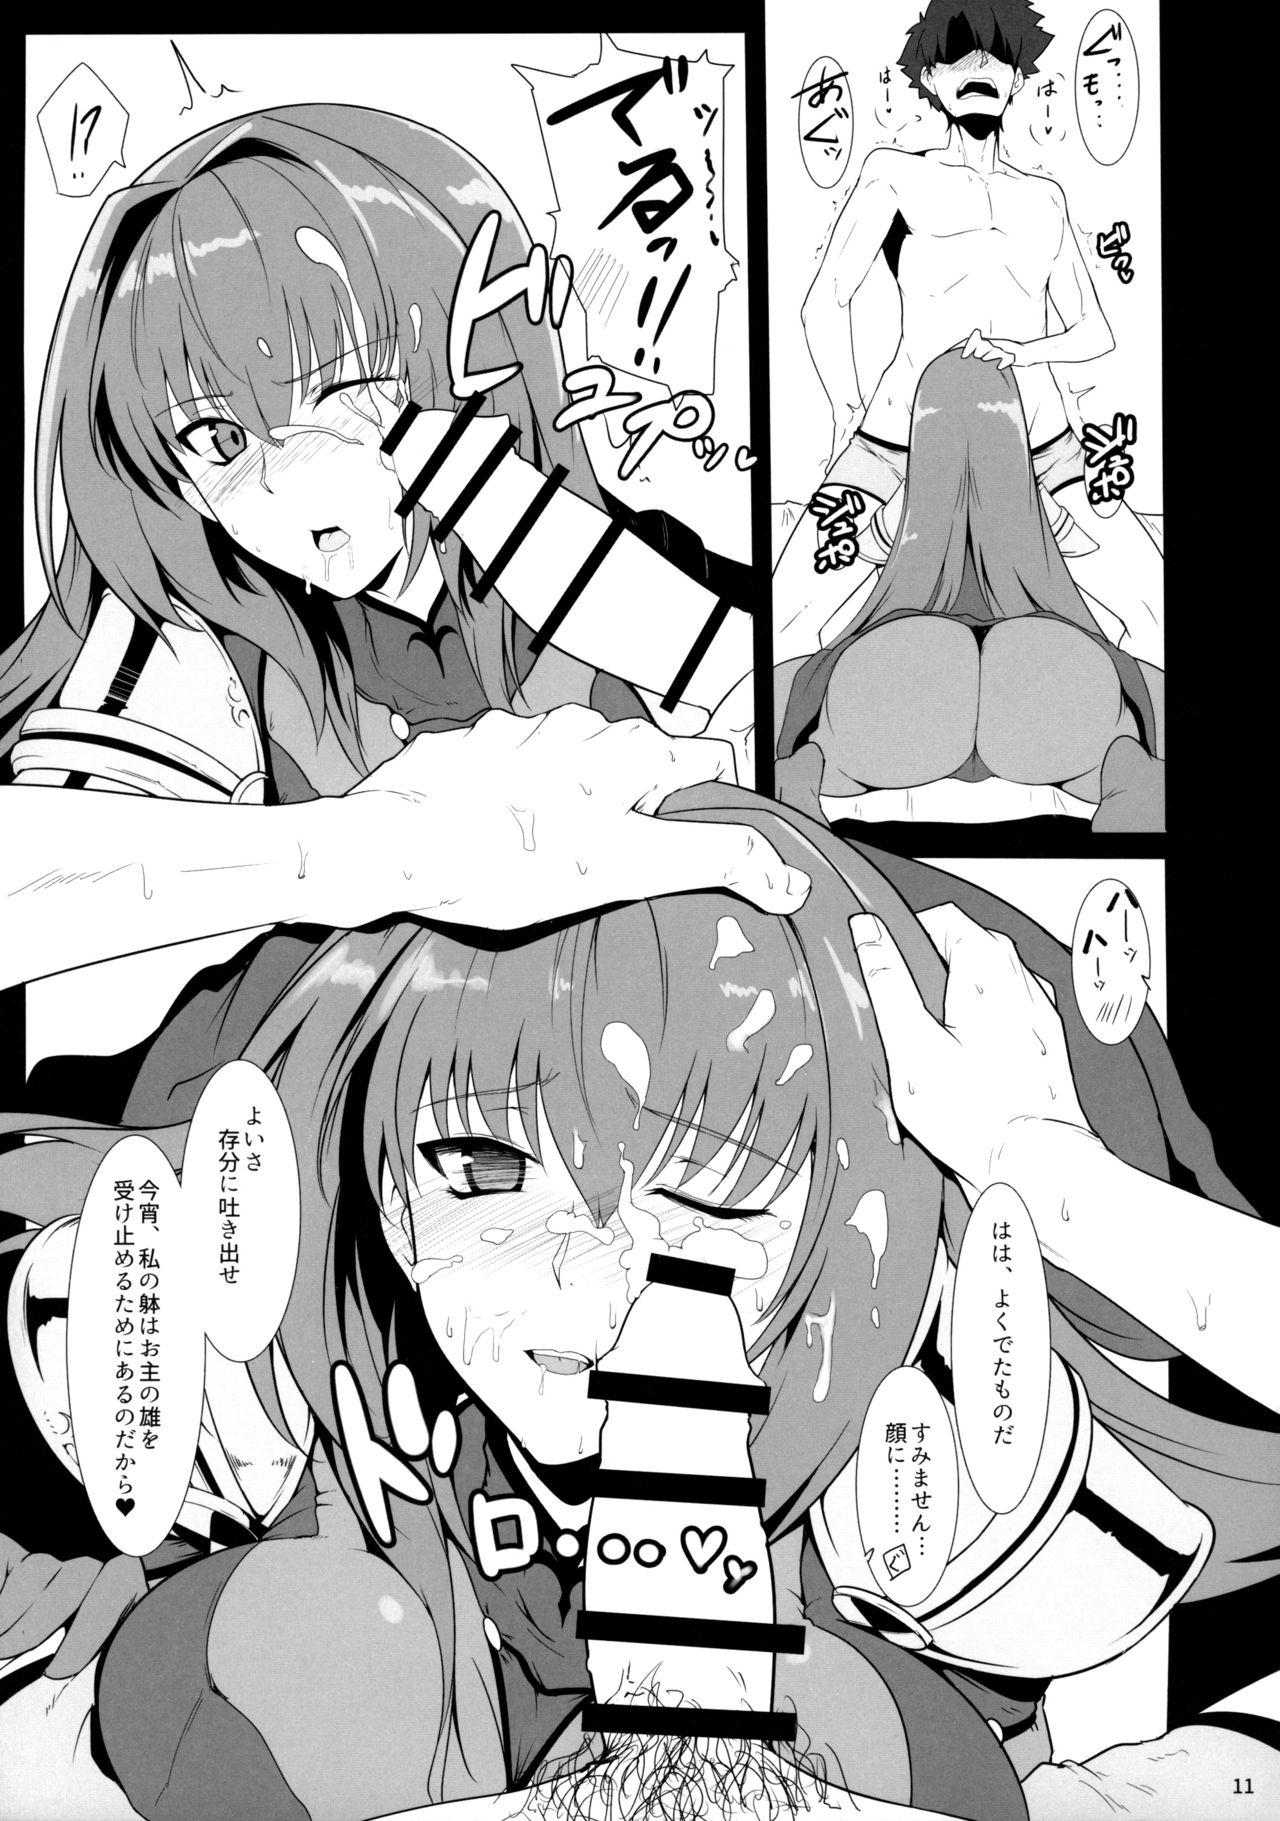 Amature Sex Tapes AH! MY MISTRESS! - Fate grand order Branquinha - Page 11